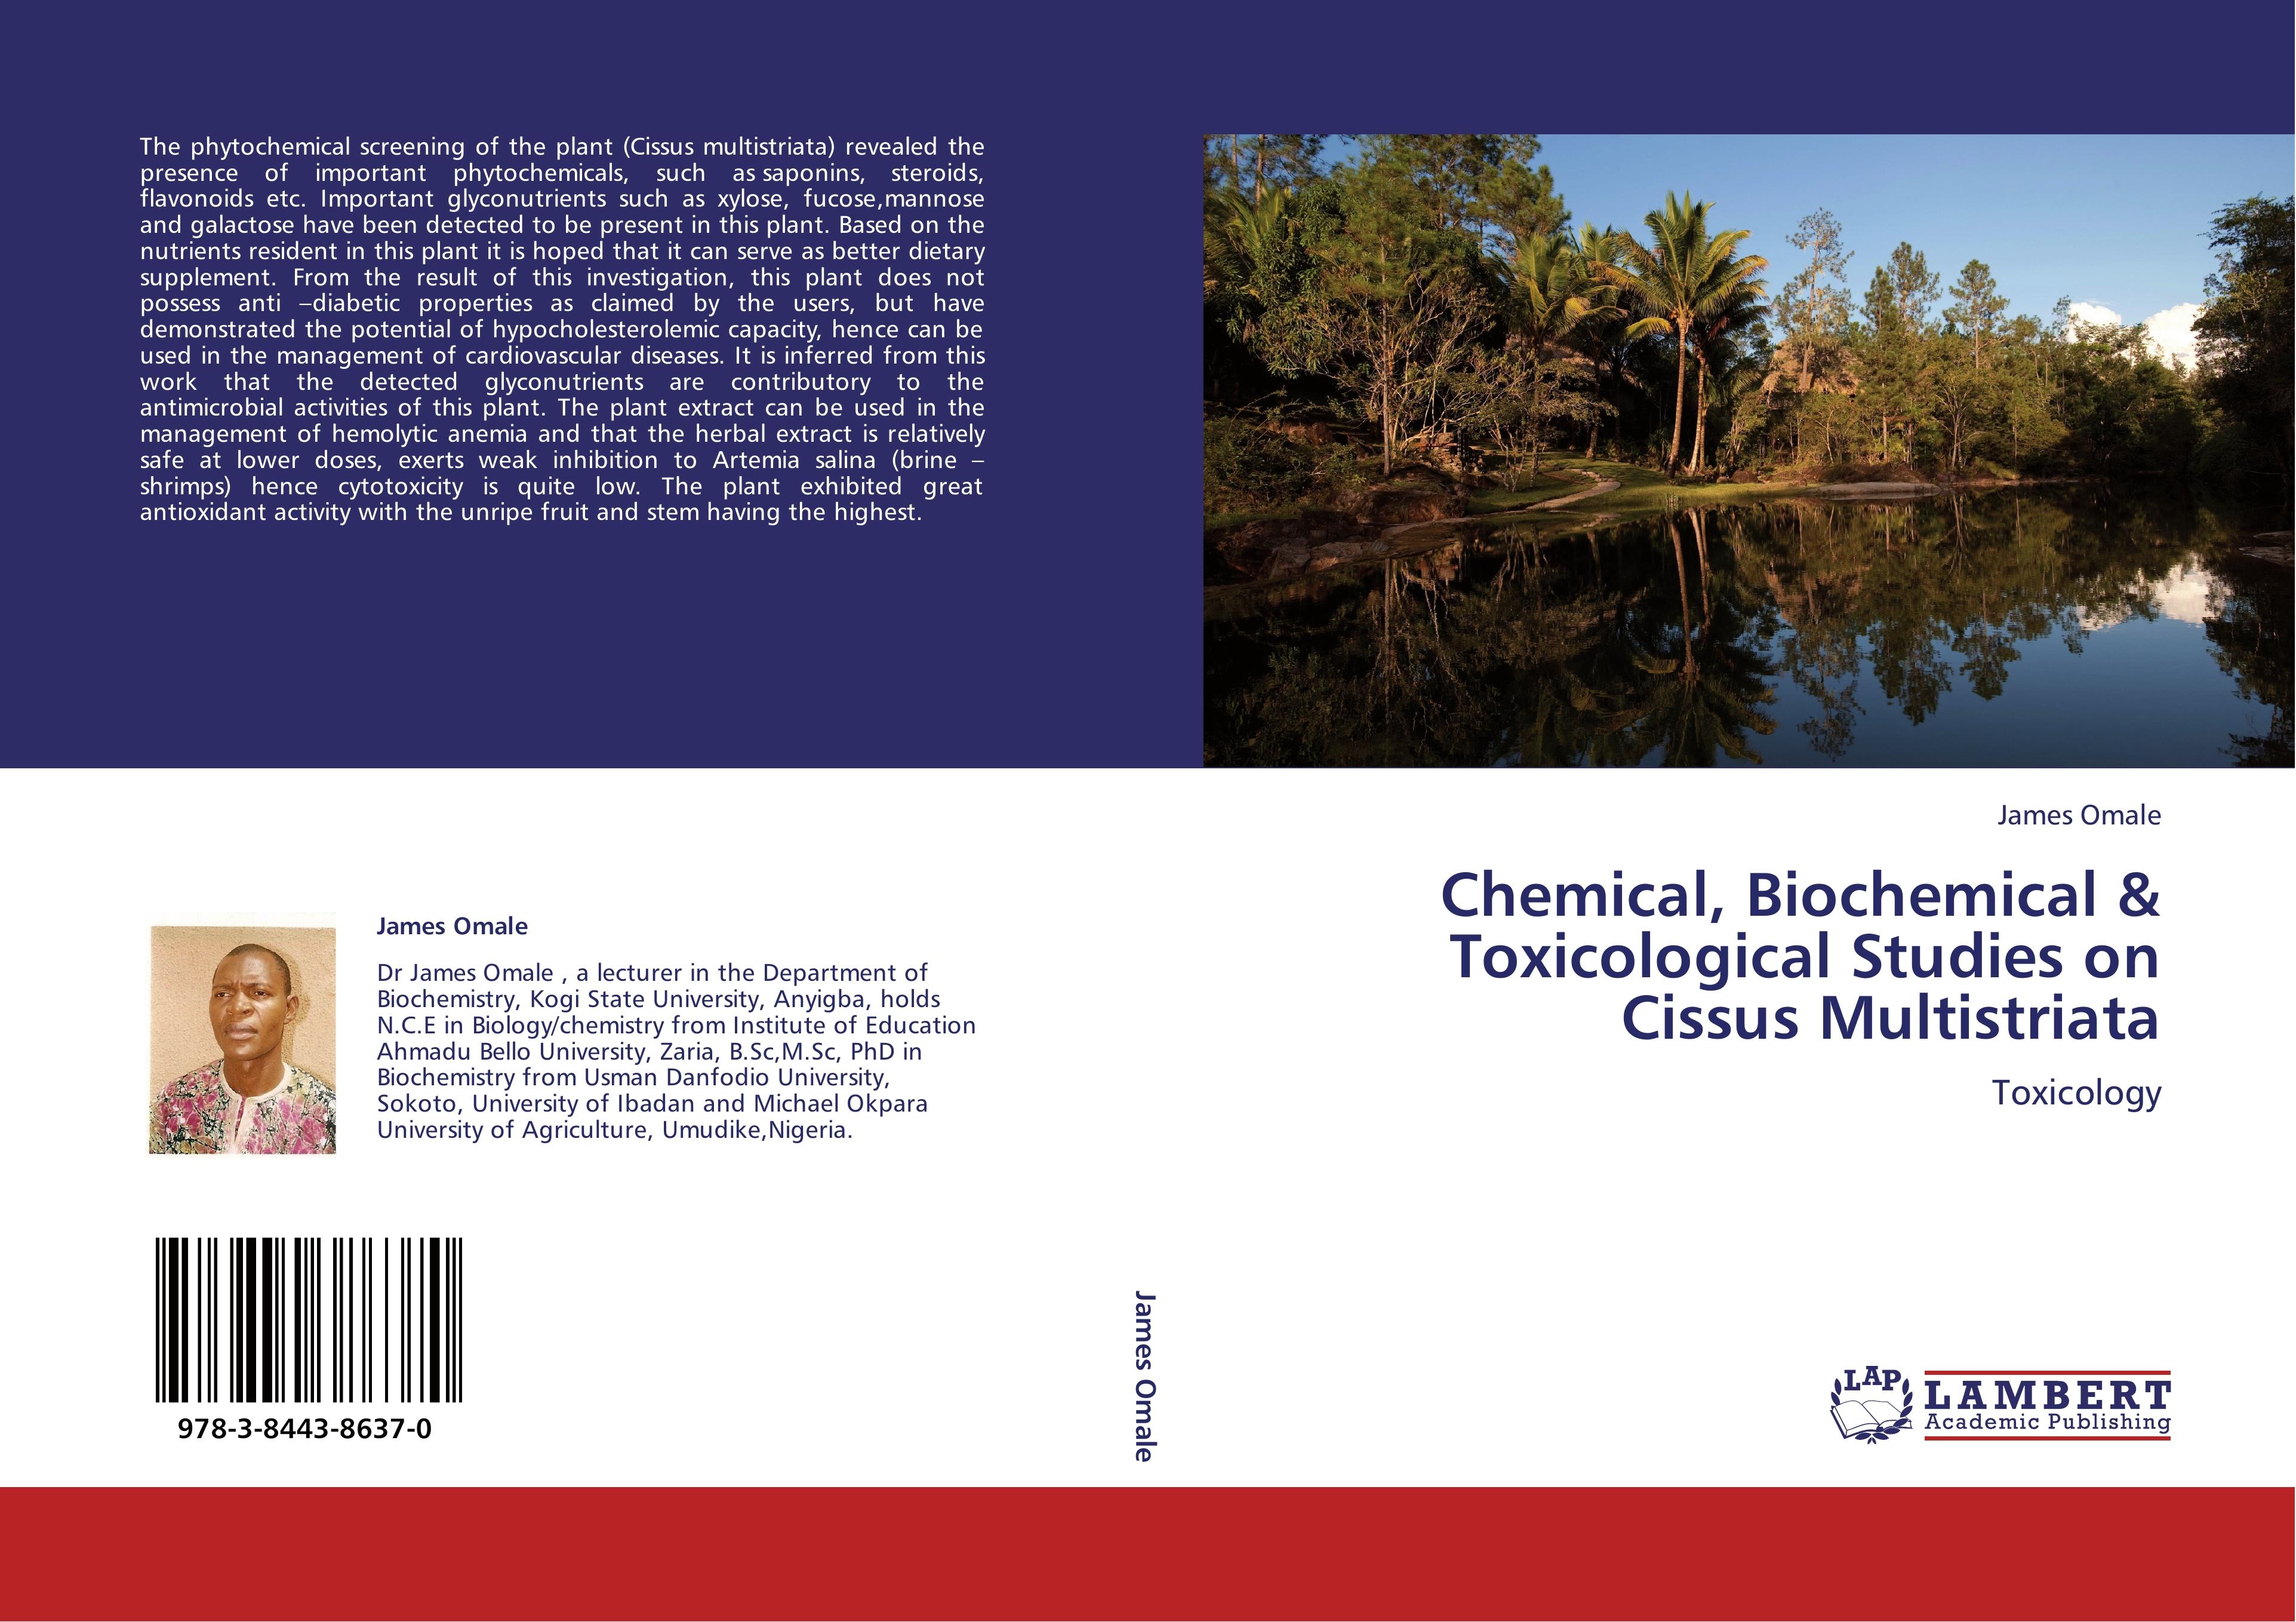 Chemical, Biochemical & Toxicological Studies on Cissus Multistriata - James Omale